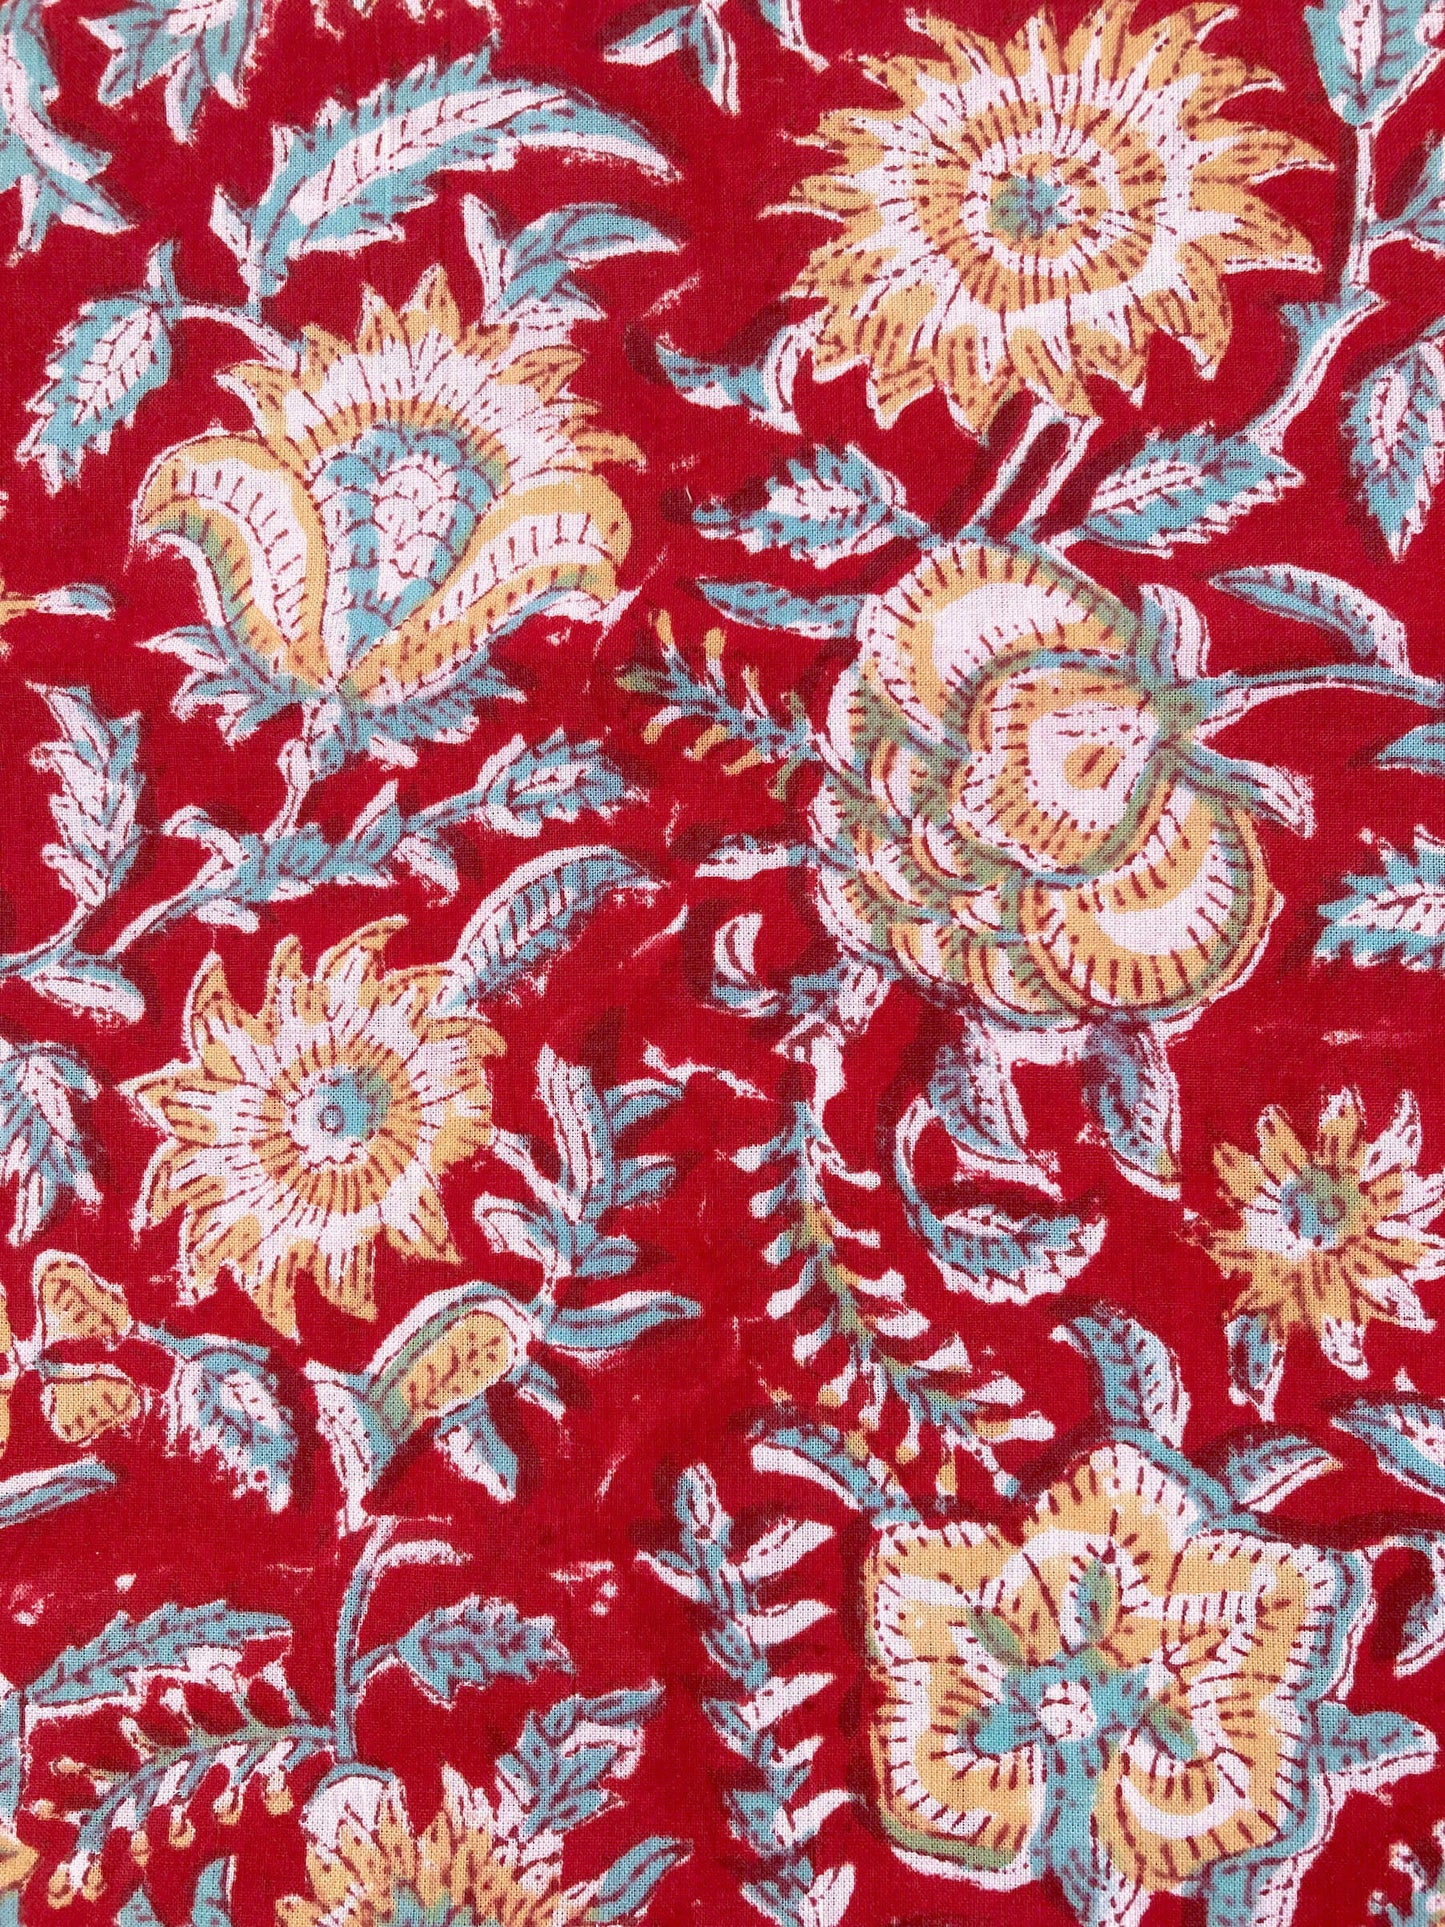 India Hand Block Printed Red Cotton Fabric #166-12